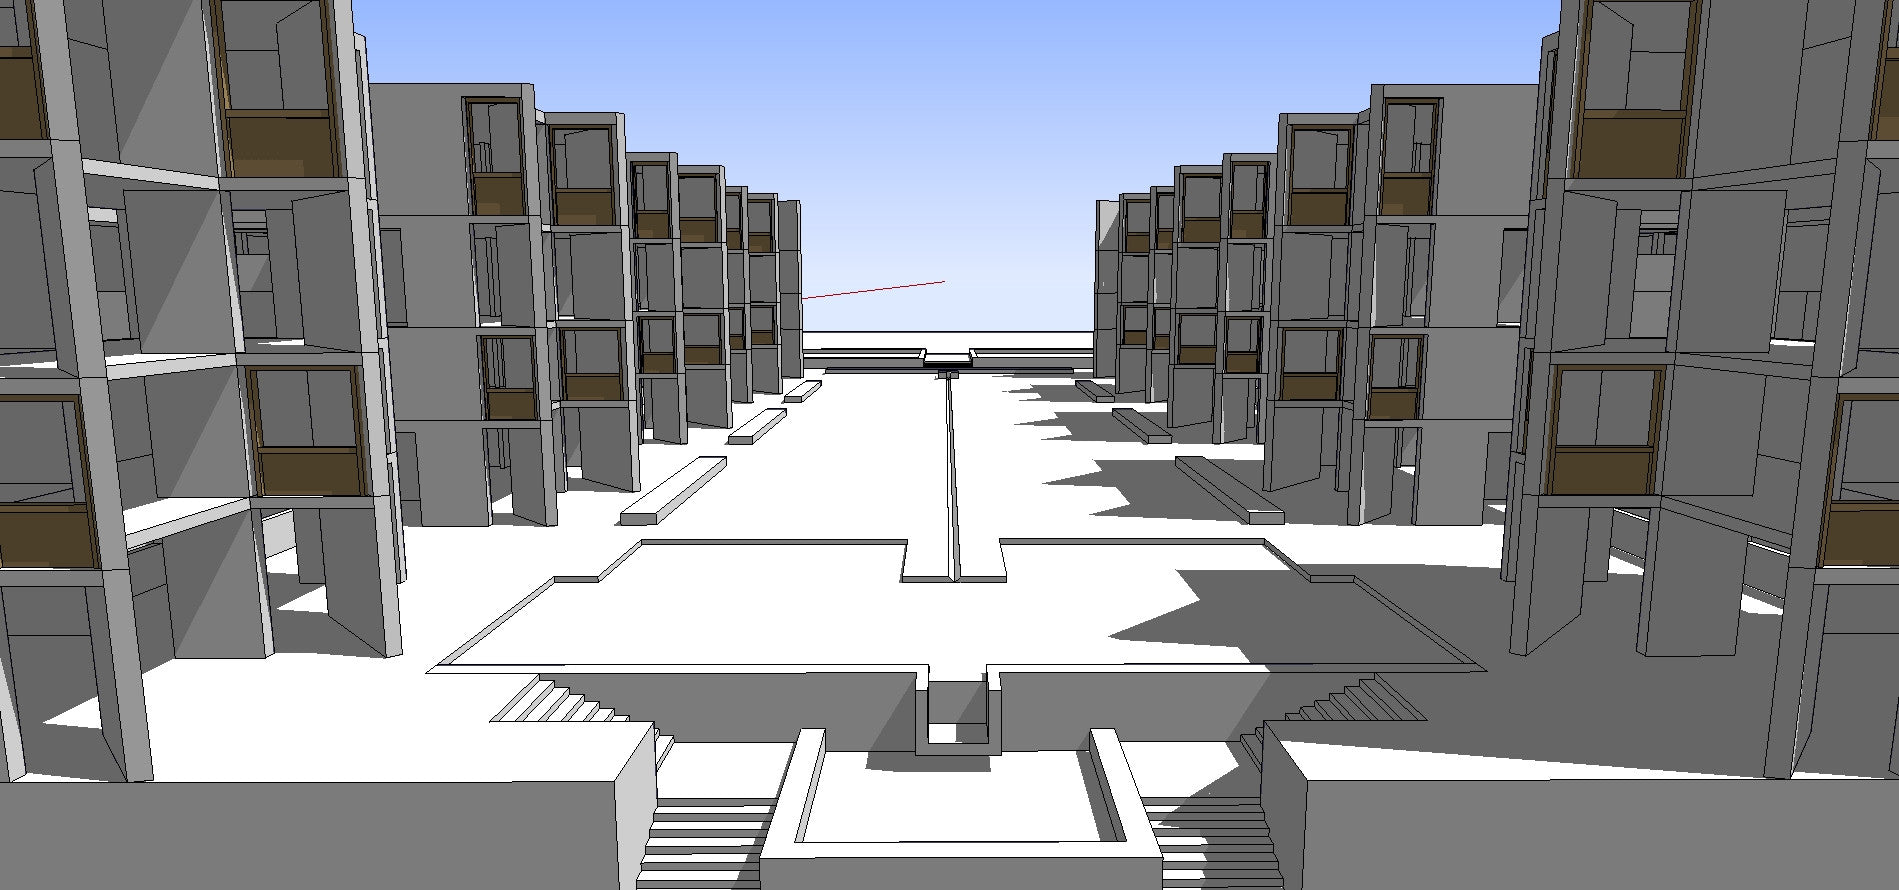 Day37 - Salk Institute / How to draw Architectures 